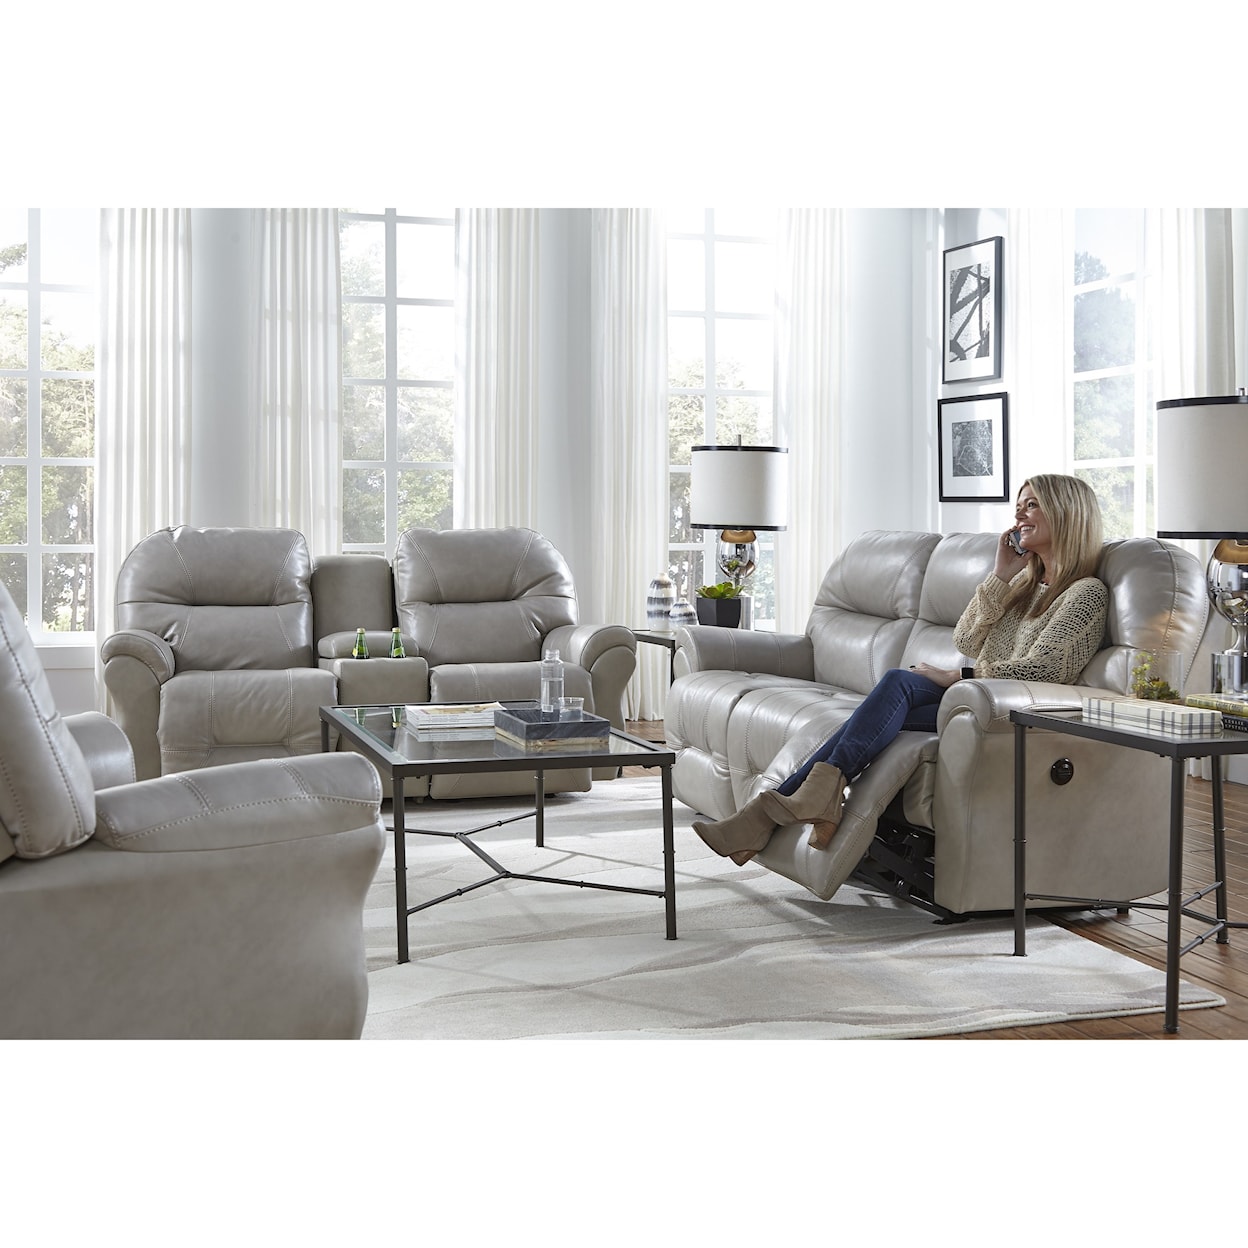 Best Home Furnishings Bodie Power Rocking Reclining Loveseat w/ Console